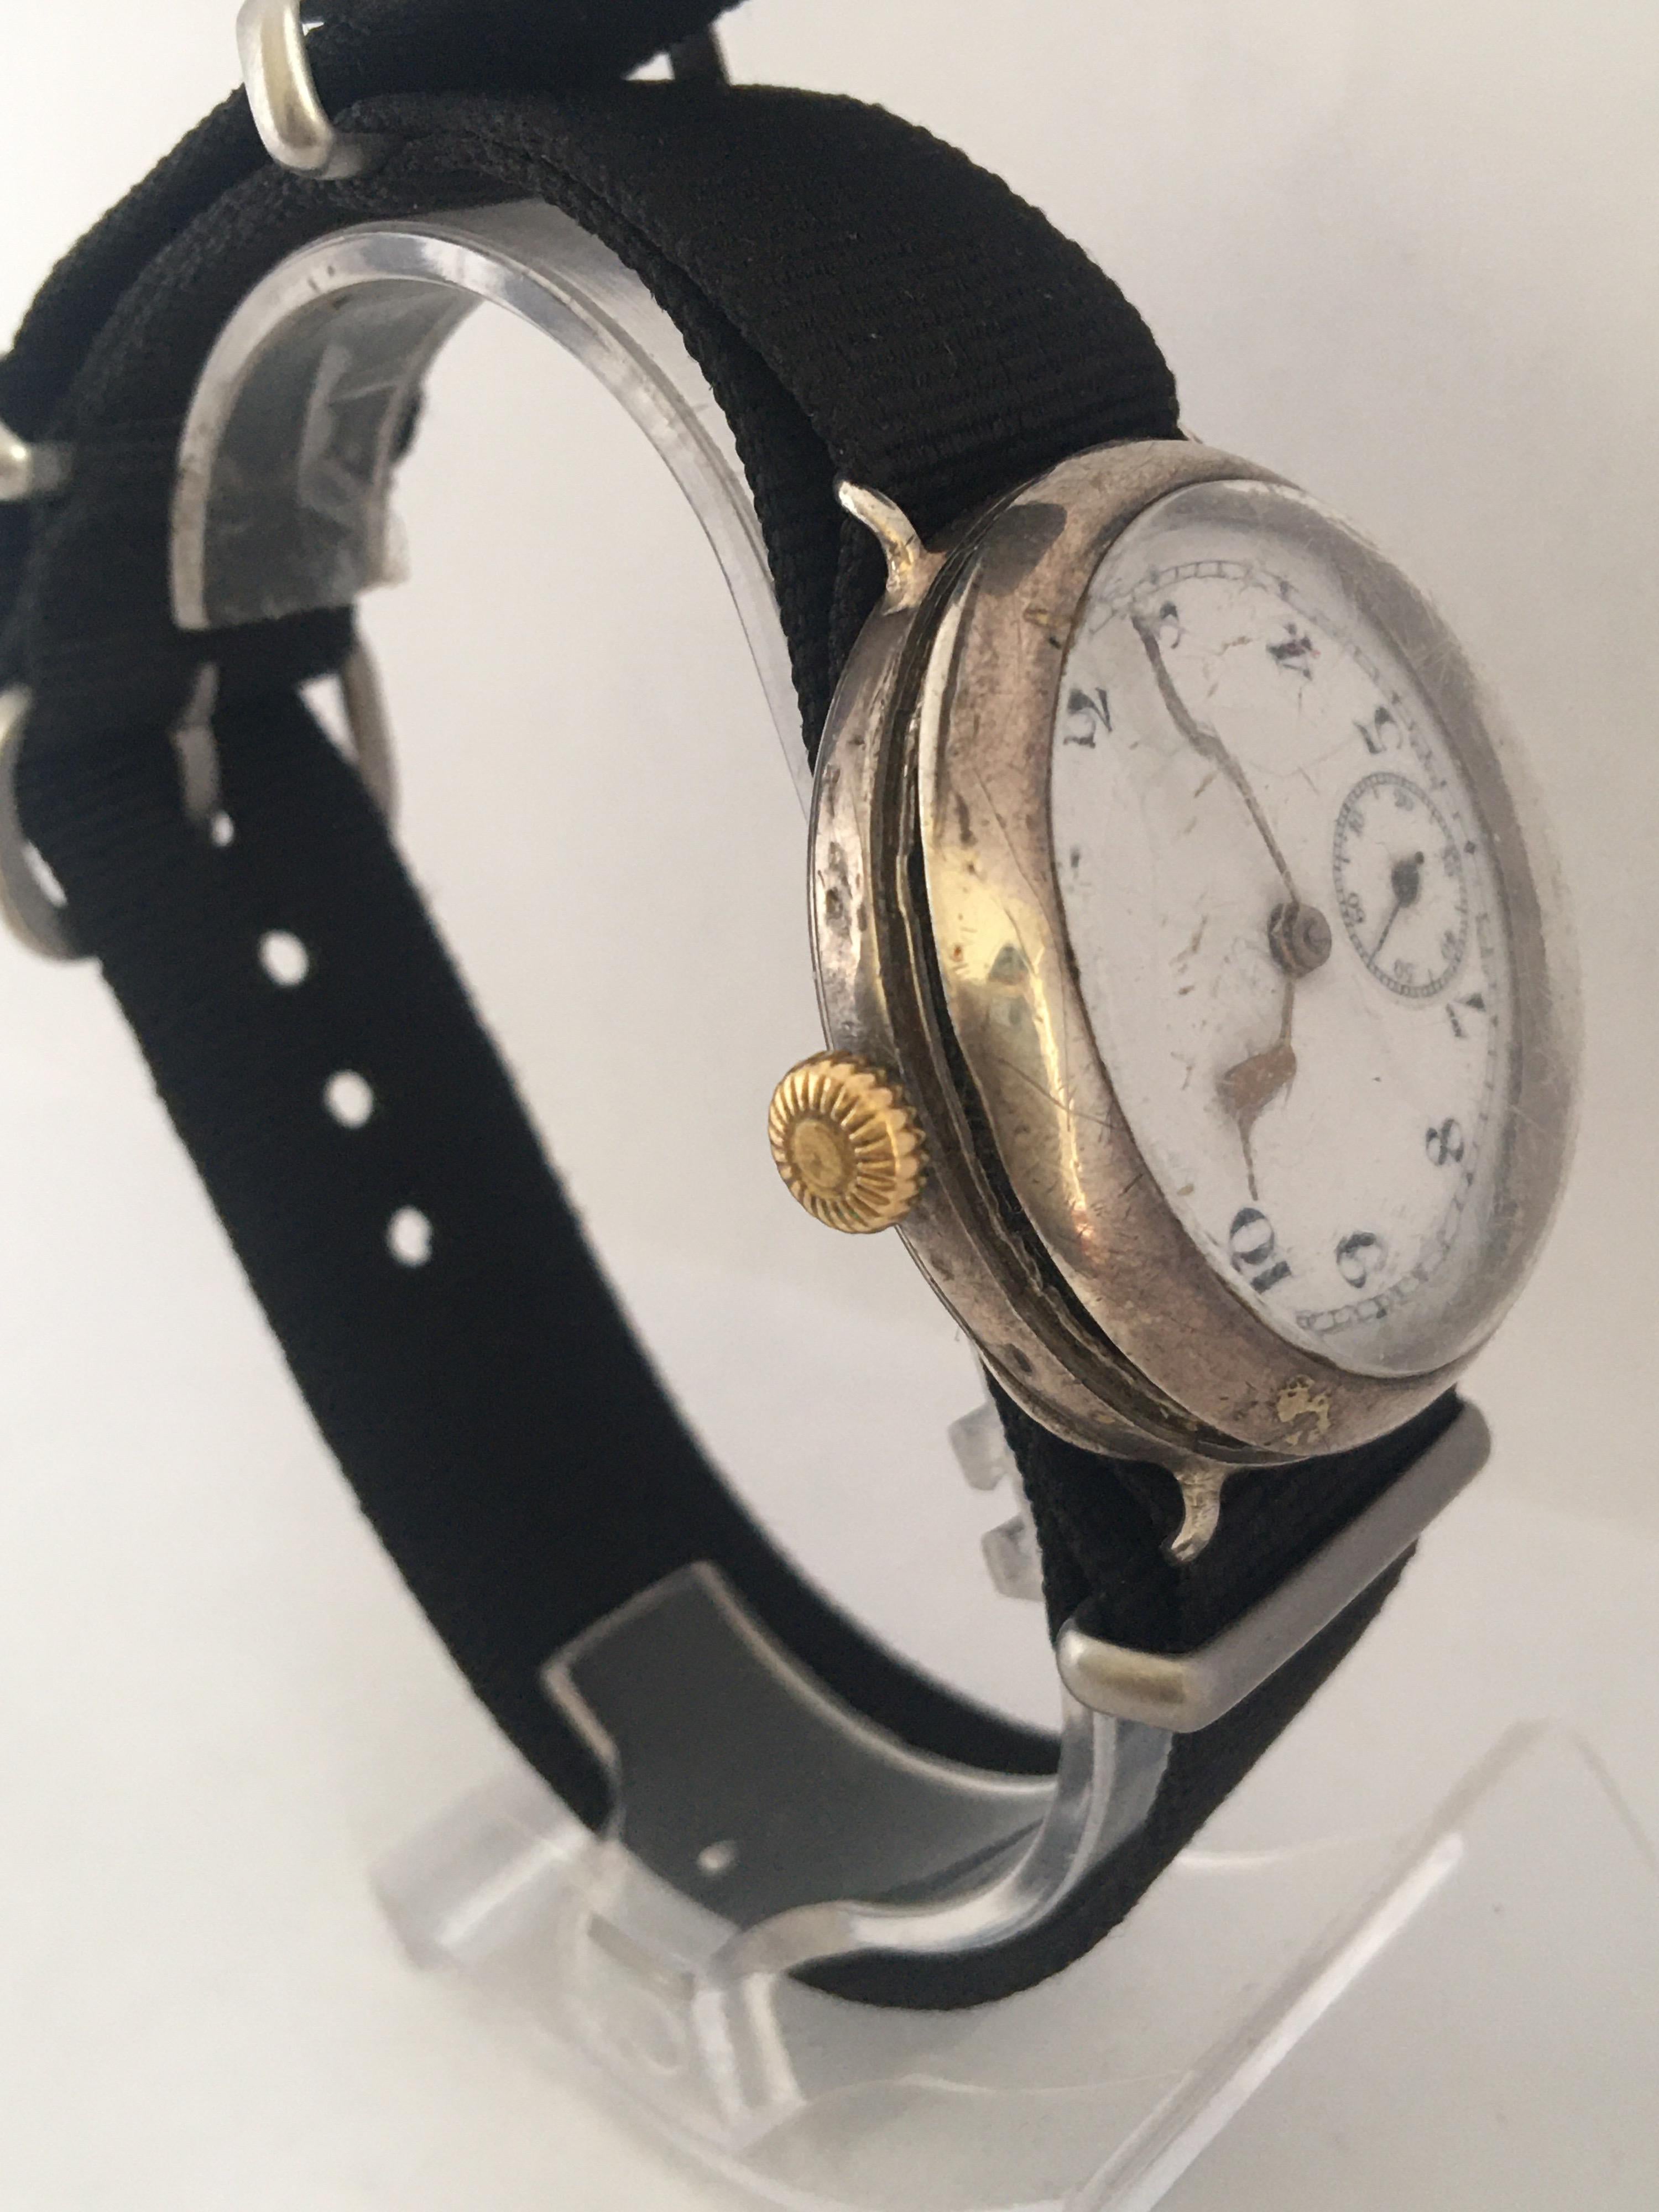 This beautiful hand-winding Antique Trench Watch is working and it is ticking well. Visible signs of ageing and wear with fine scratches and dents on the silver watch case and on the glass. some fine cracks on the enamel dial and the front watch